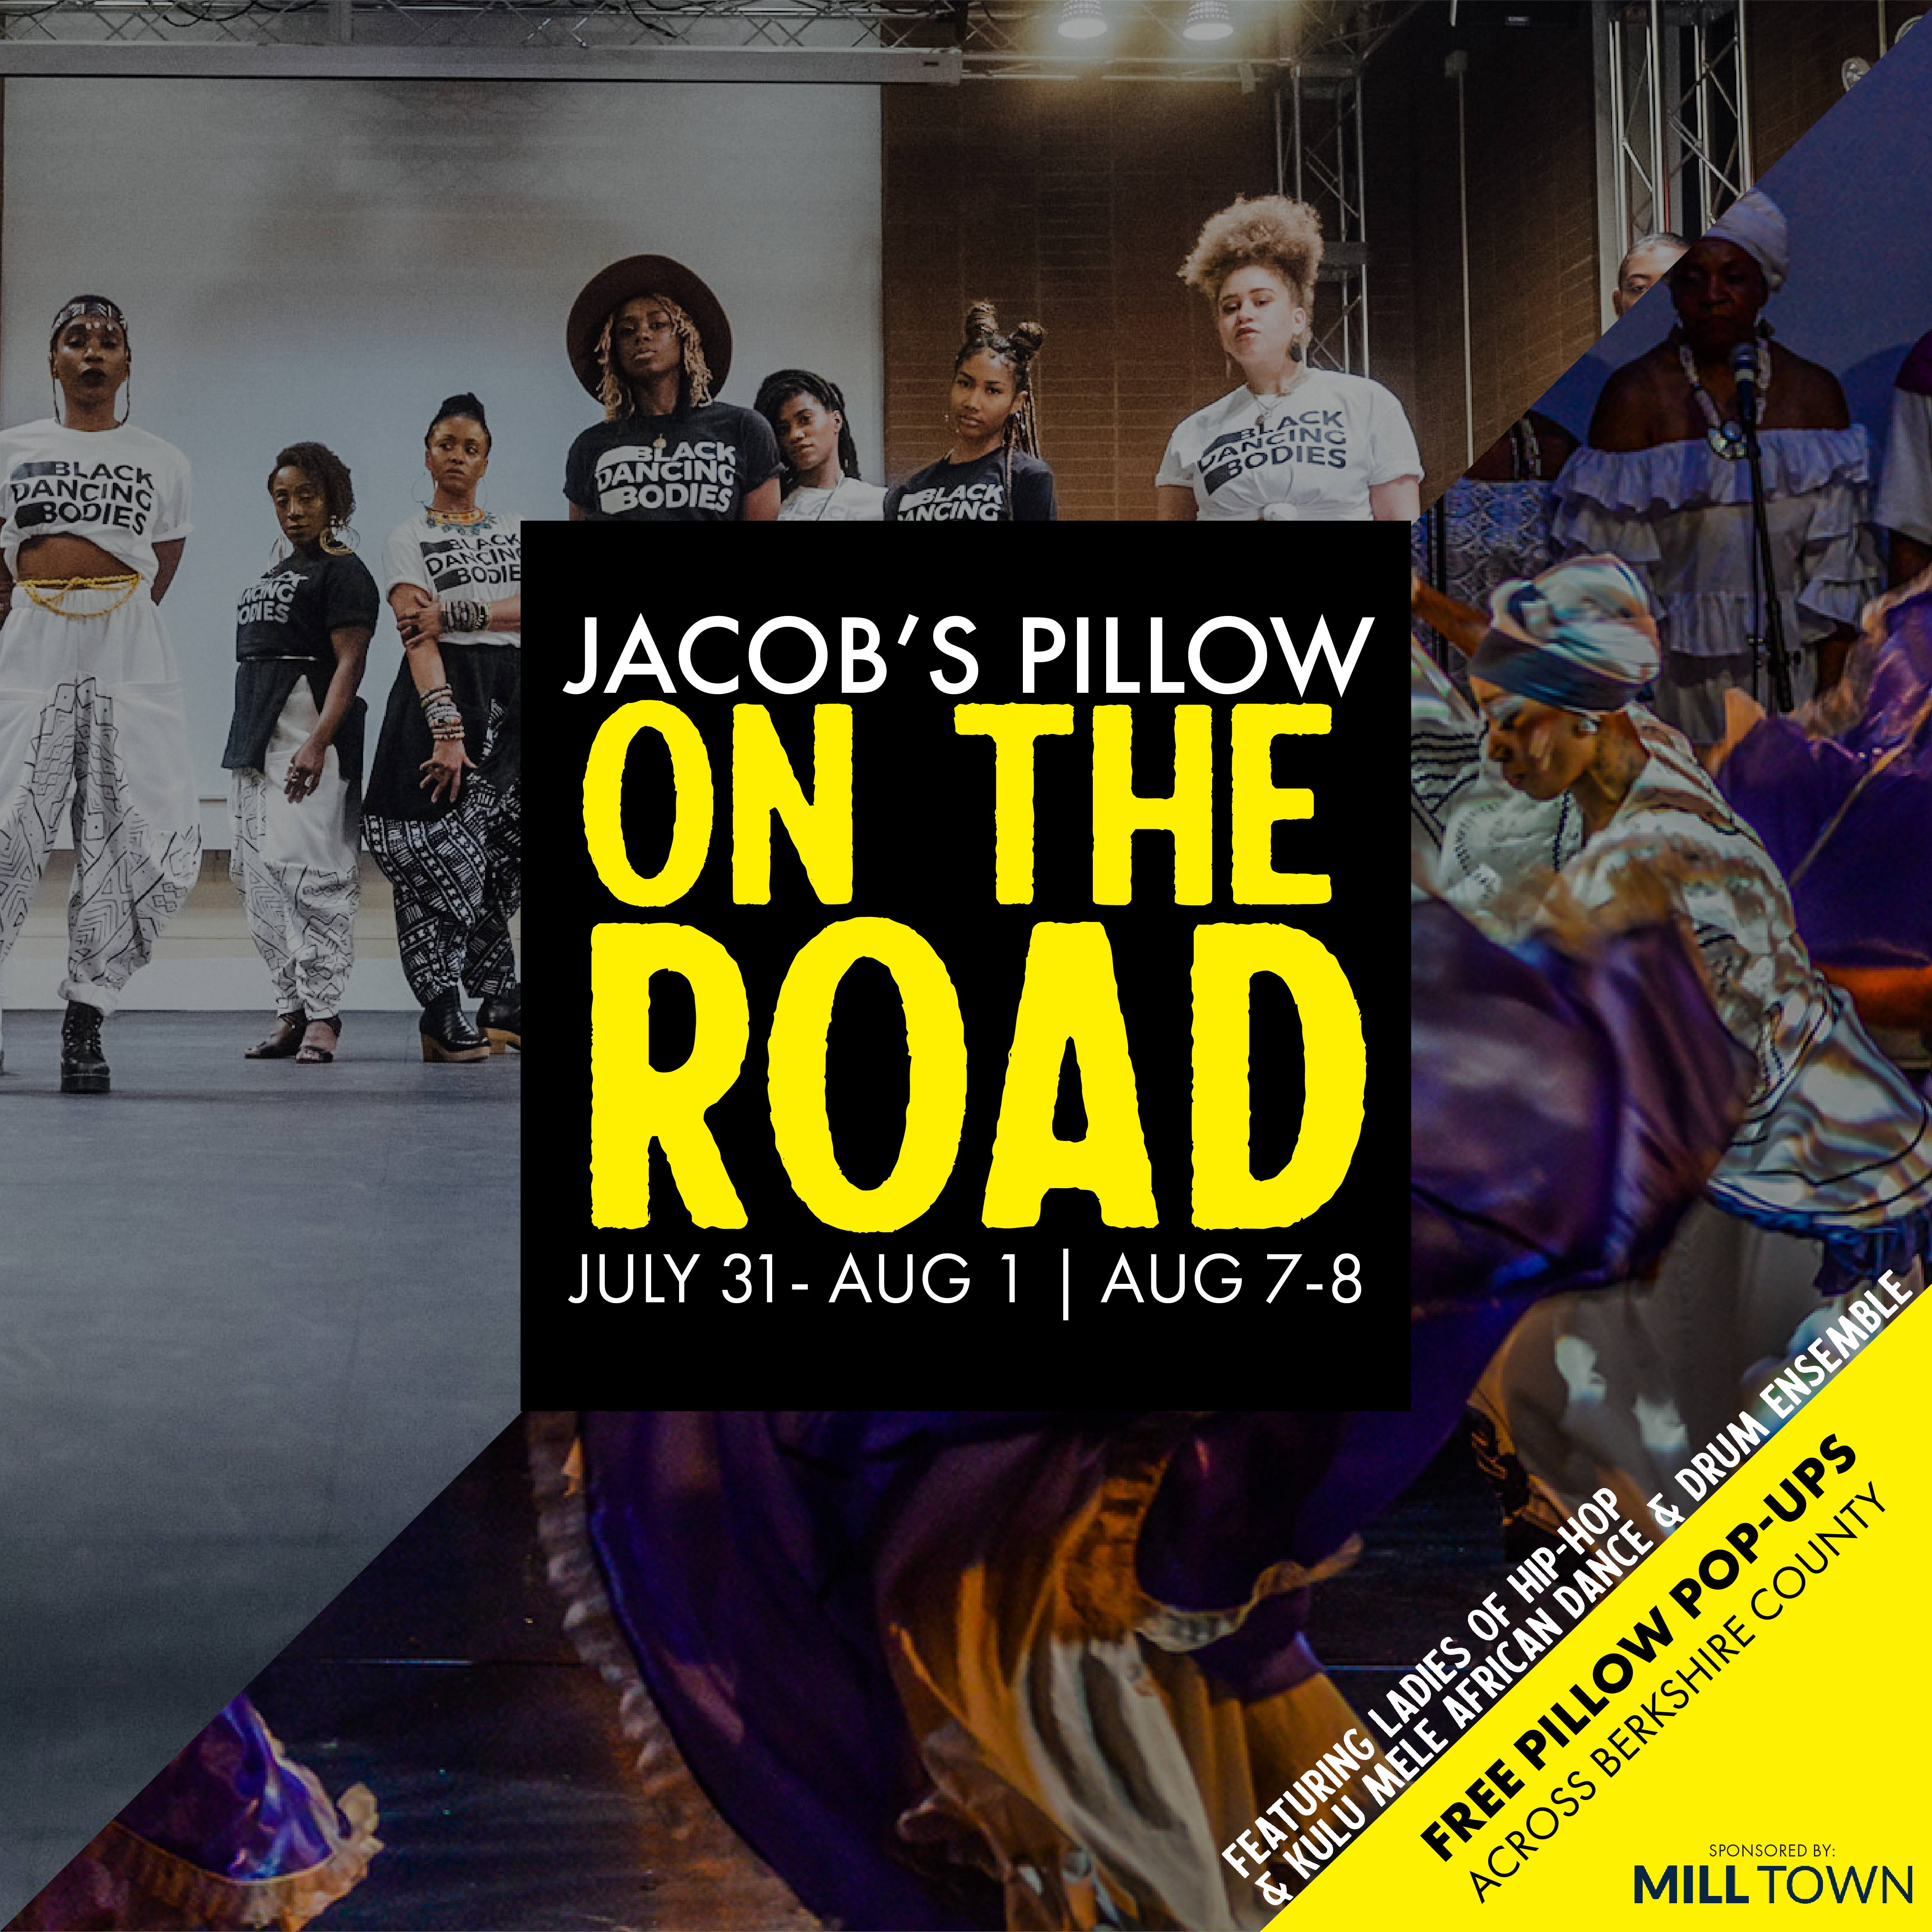 JACOB’S PILLOW ON THE ROAD